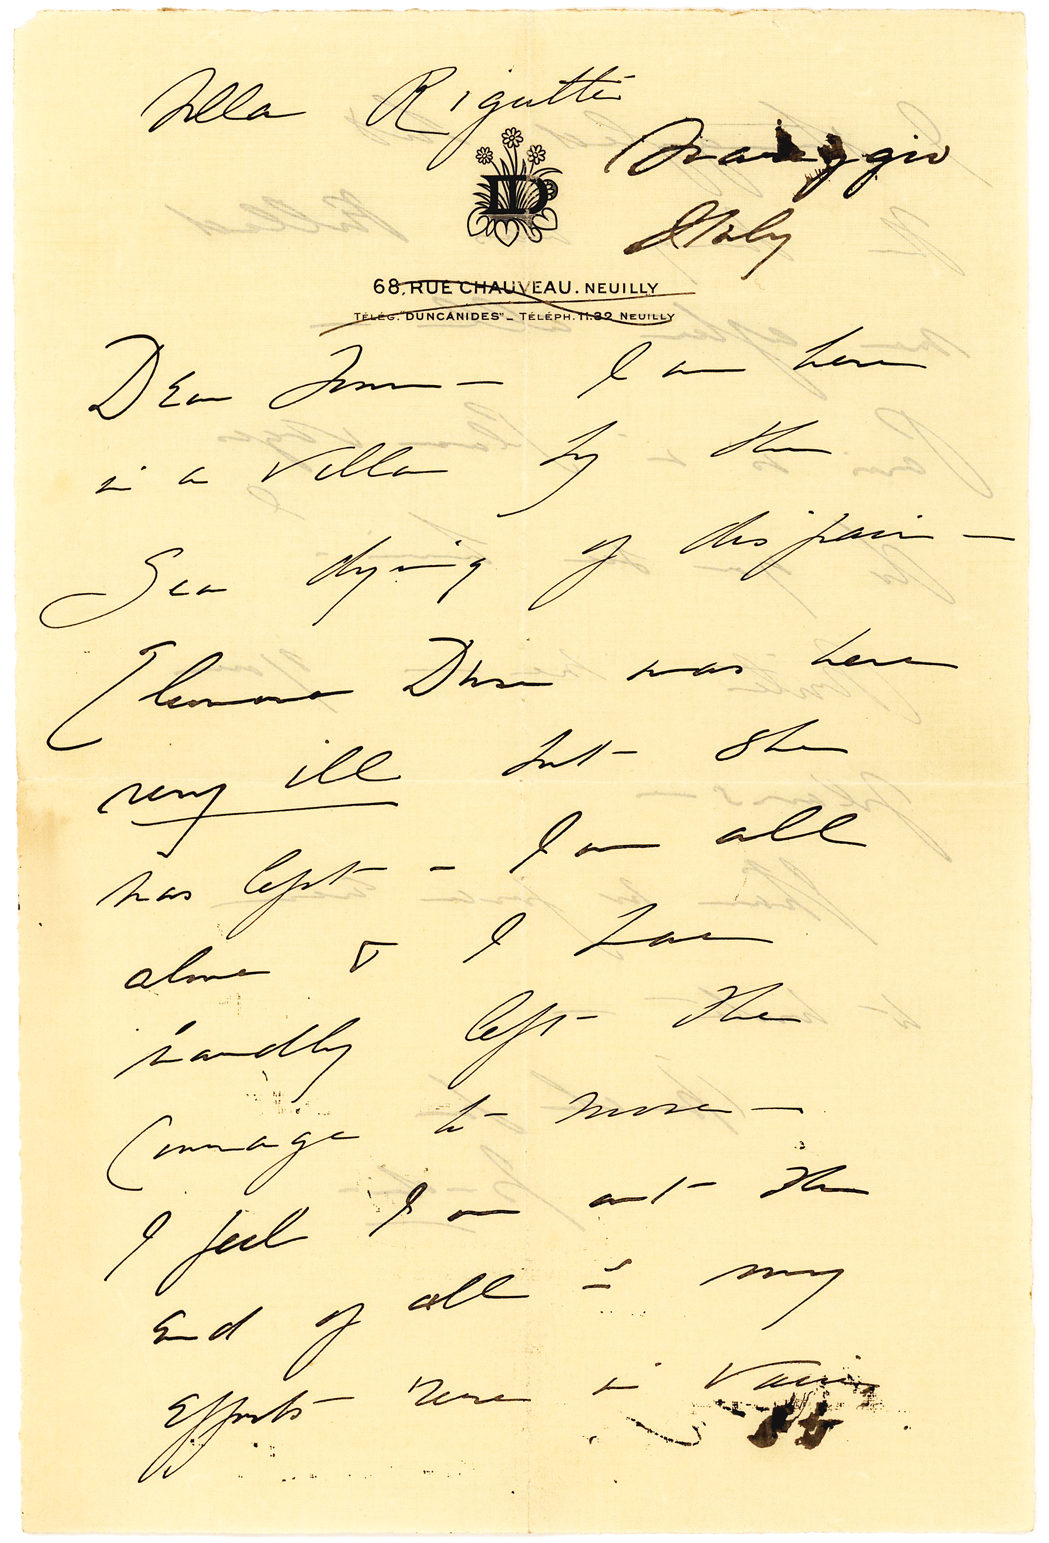 Autograph Letter Signed Mourning the Tragic Death of Her Two Children: “I feel I am at the end of all… I struggled but the thing has killed me after all… I am… dying of despair”